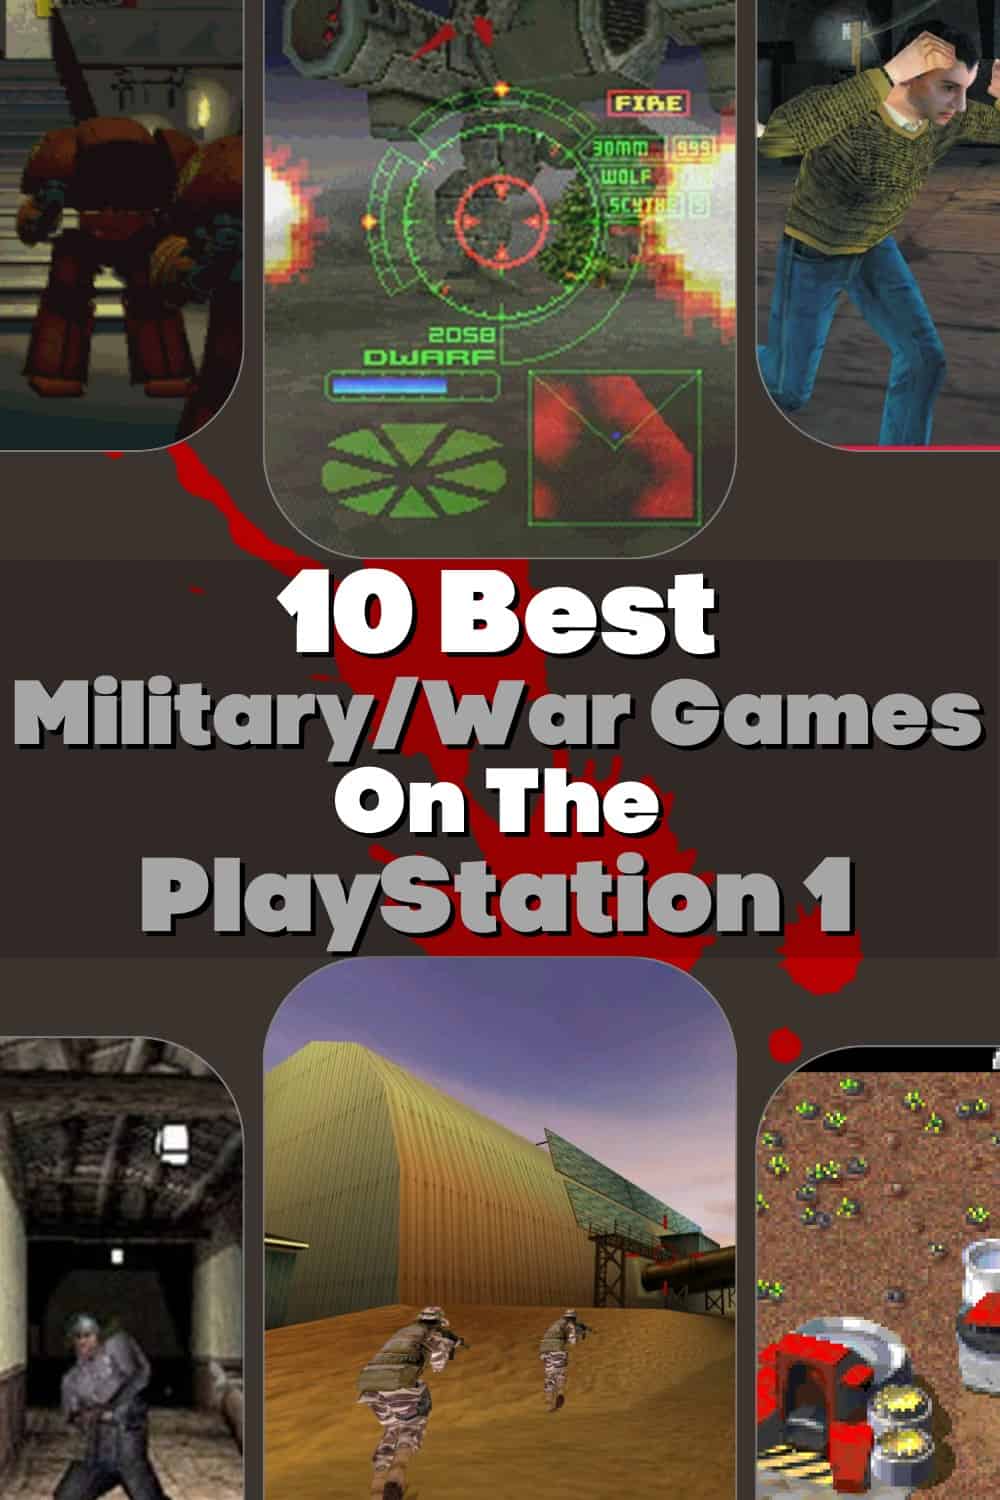 What Is the Best Military Game On The PlayStation 1?